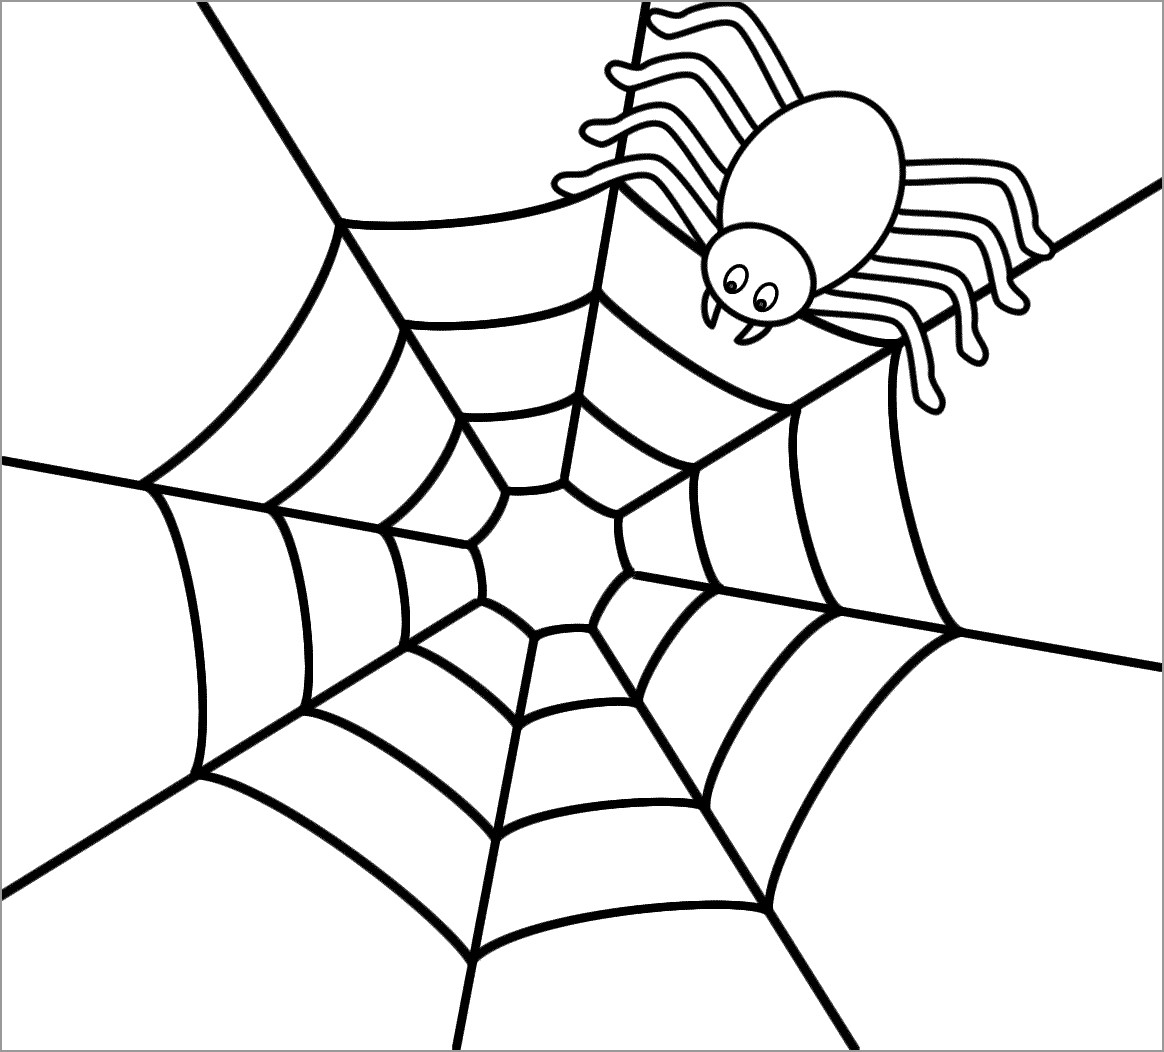 Cute Spider Coloring Page for Kids